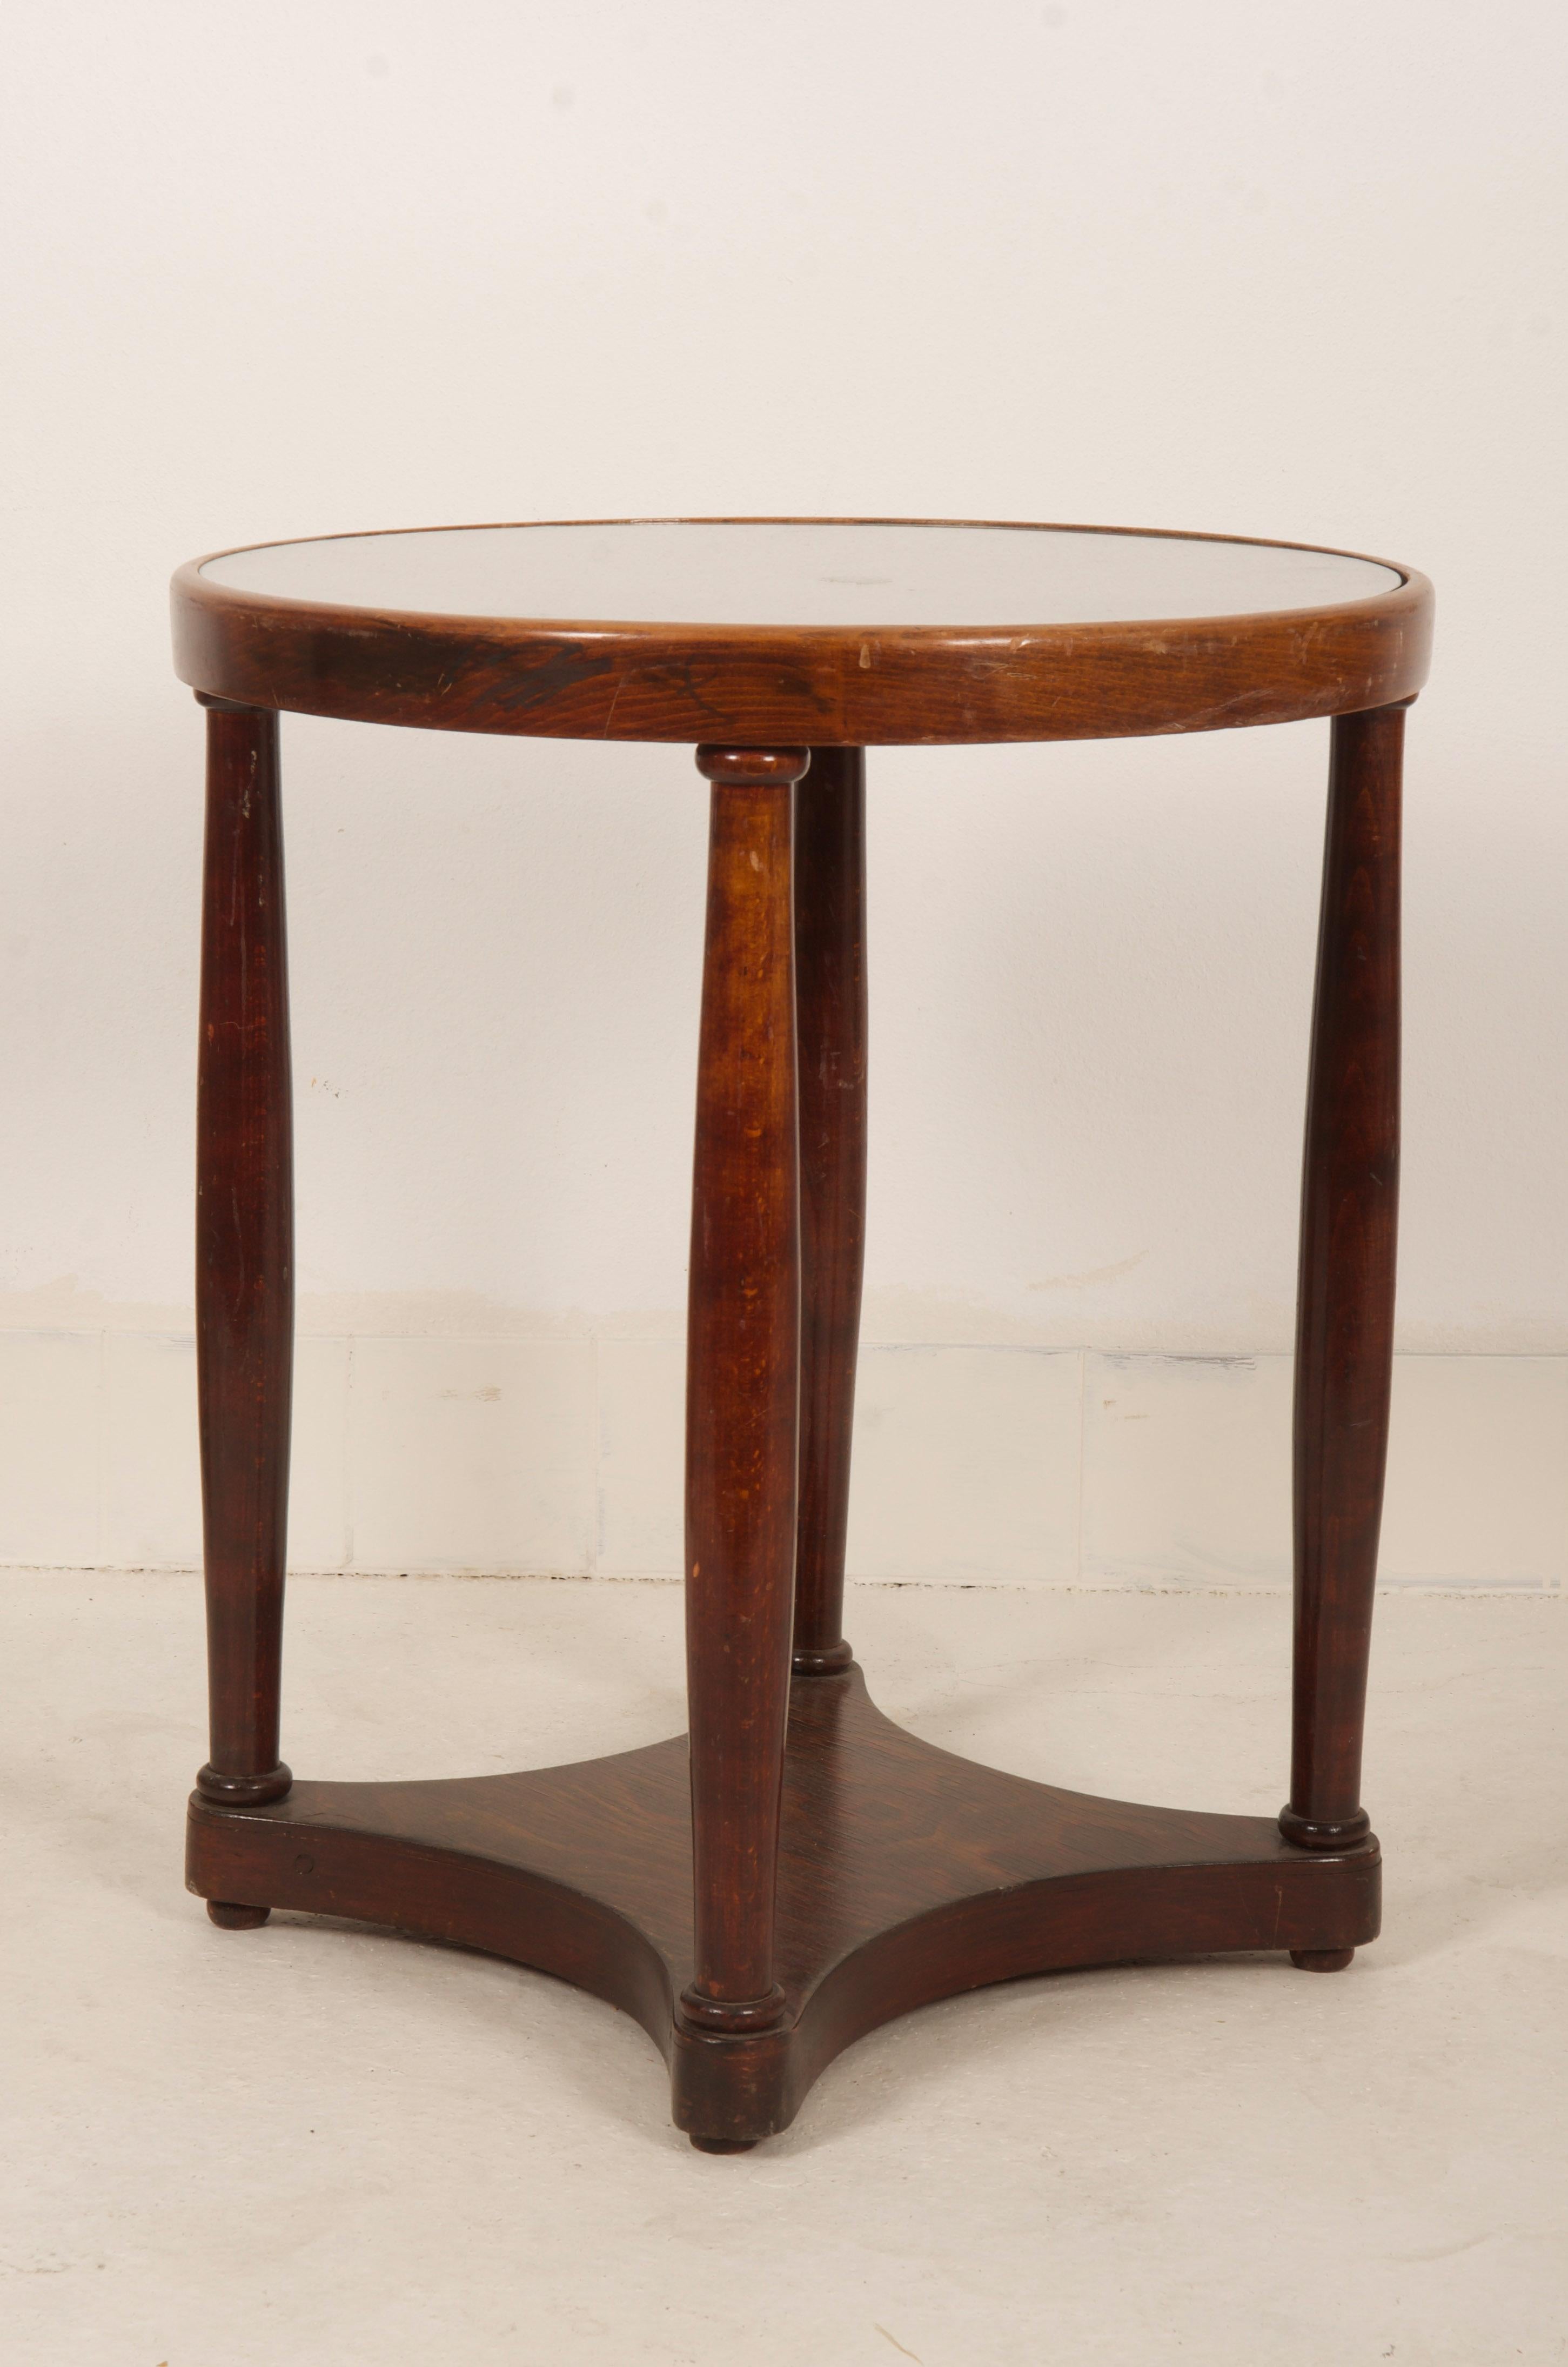 Round table with a glass top, designed about 1910 by Josef Hoffmann for J&J Kohn, Vienna, beechwood, stained to dark mahogany.
It was restored but visible signs of use, otherwise it is in good.
Factory mark on the underside.